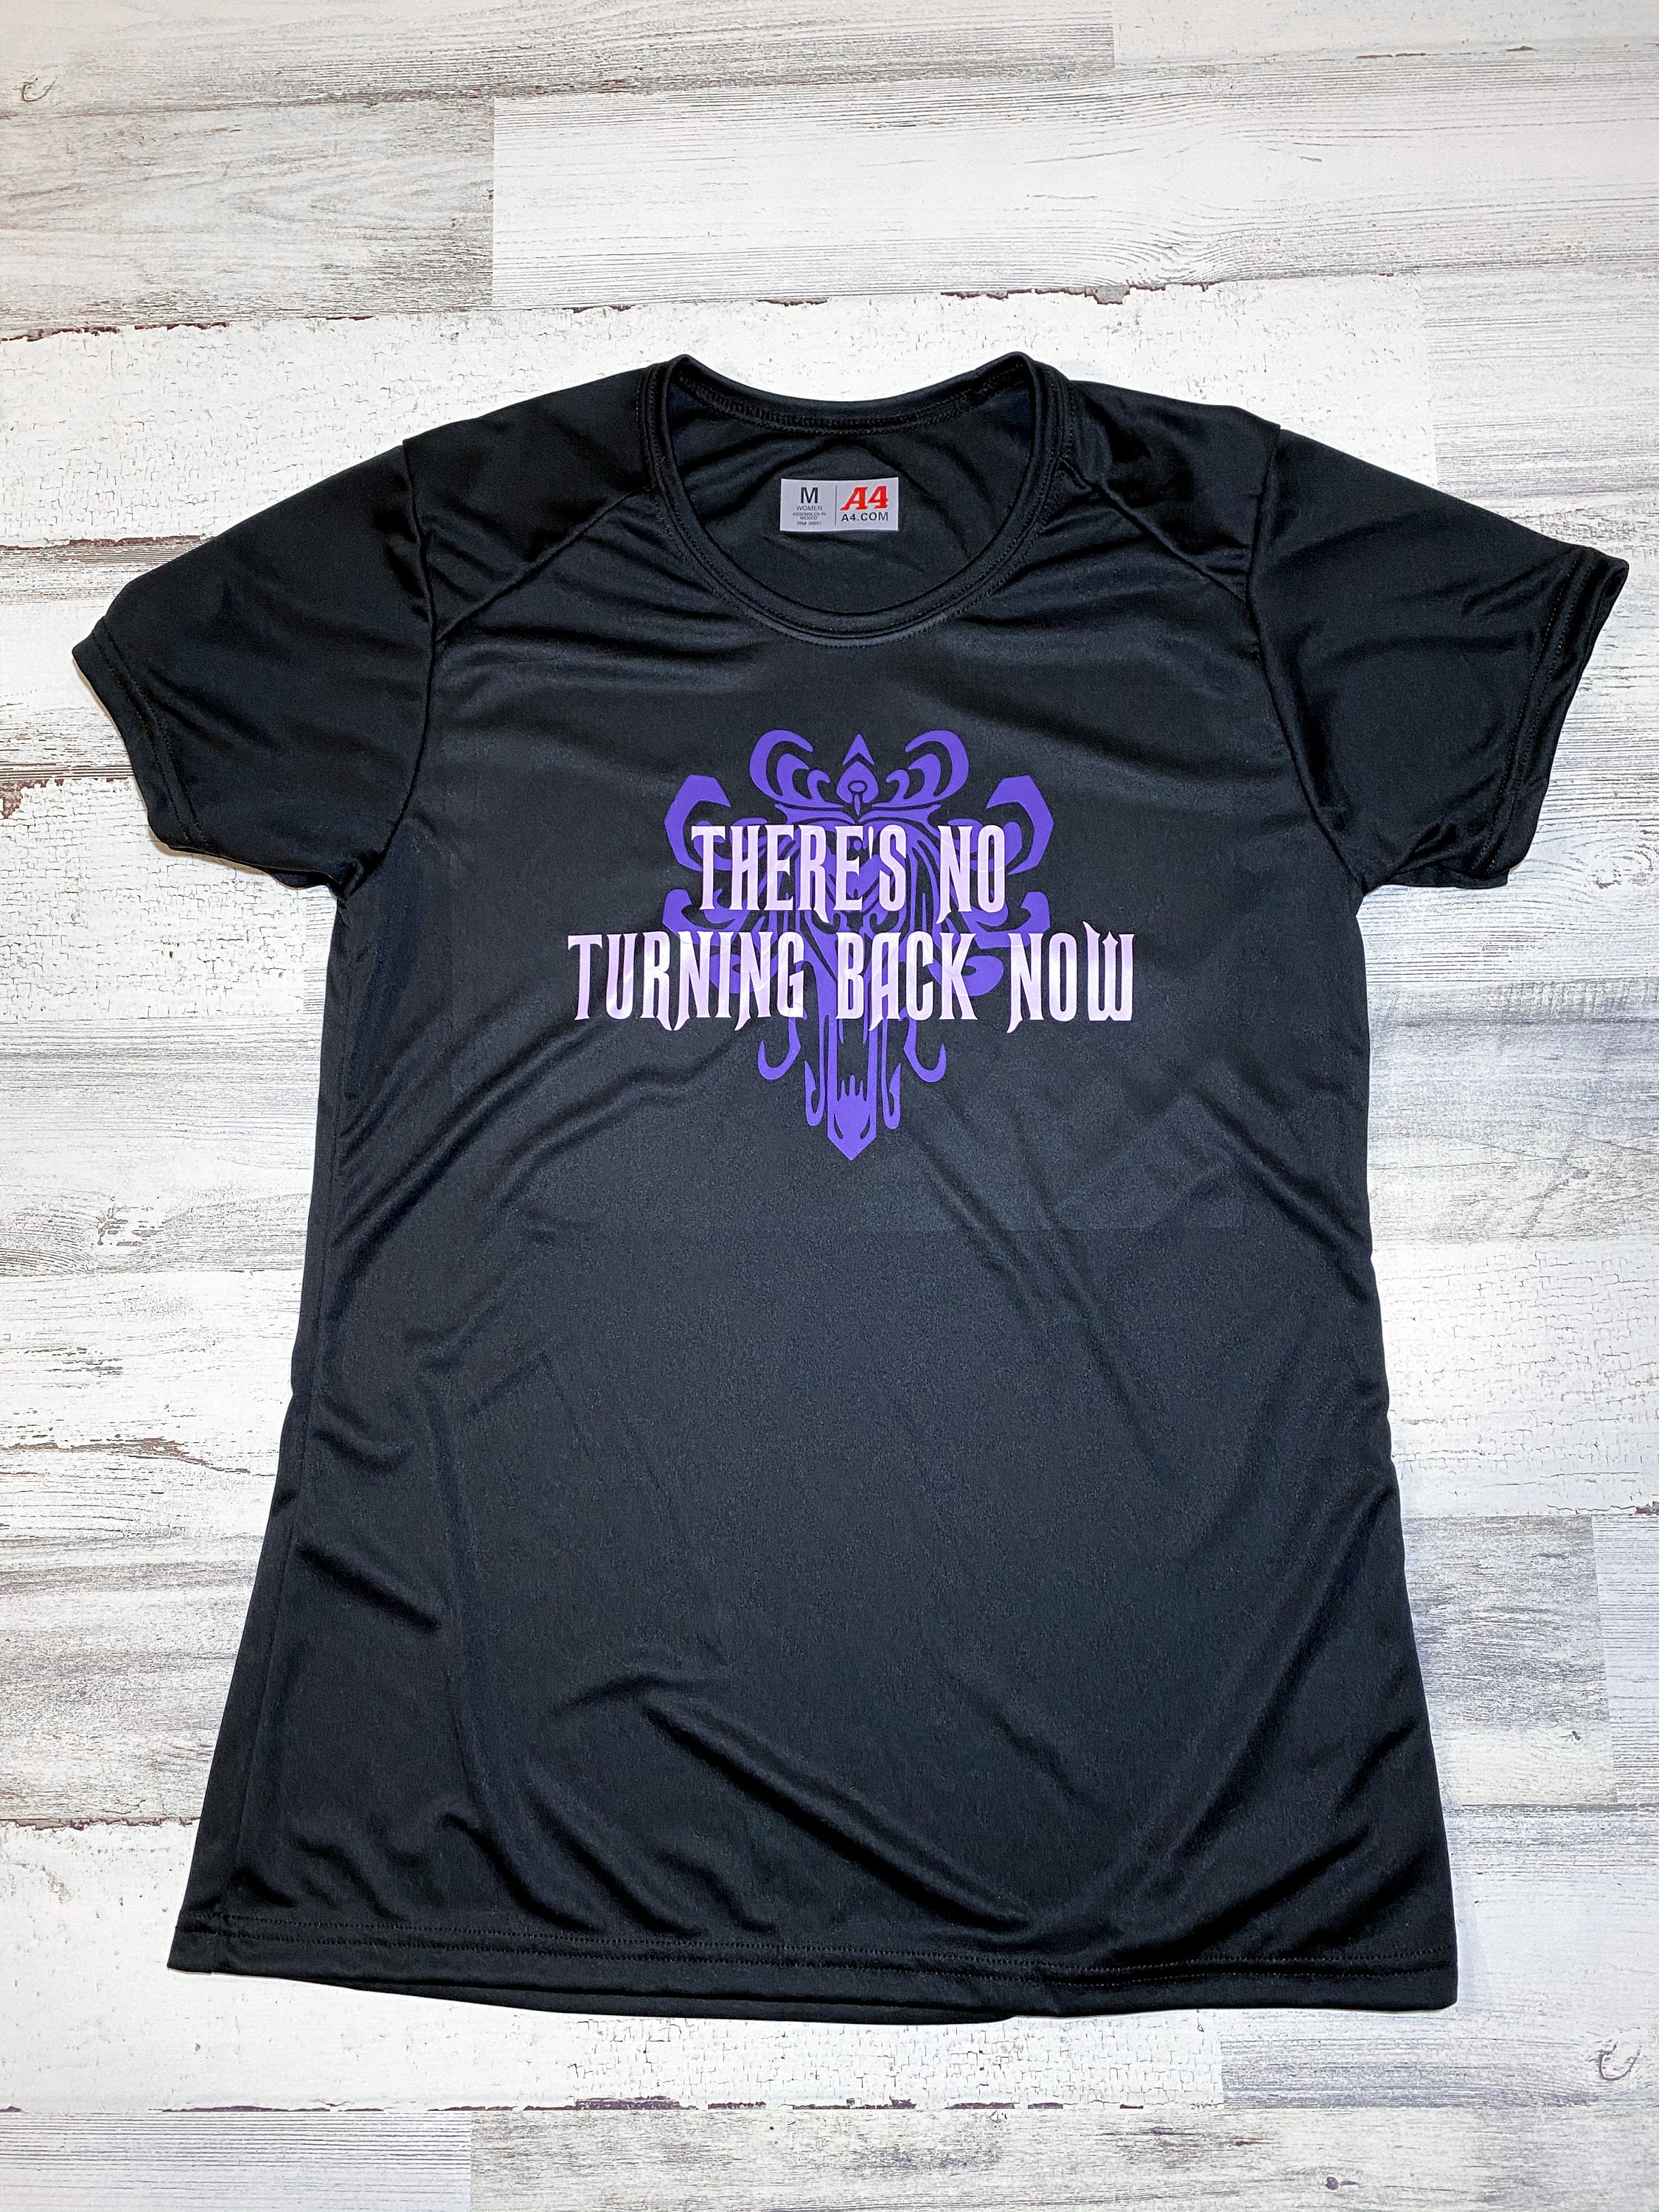 Haunted Mansion Running Shirt There's No Turning Back | Etsy